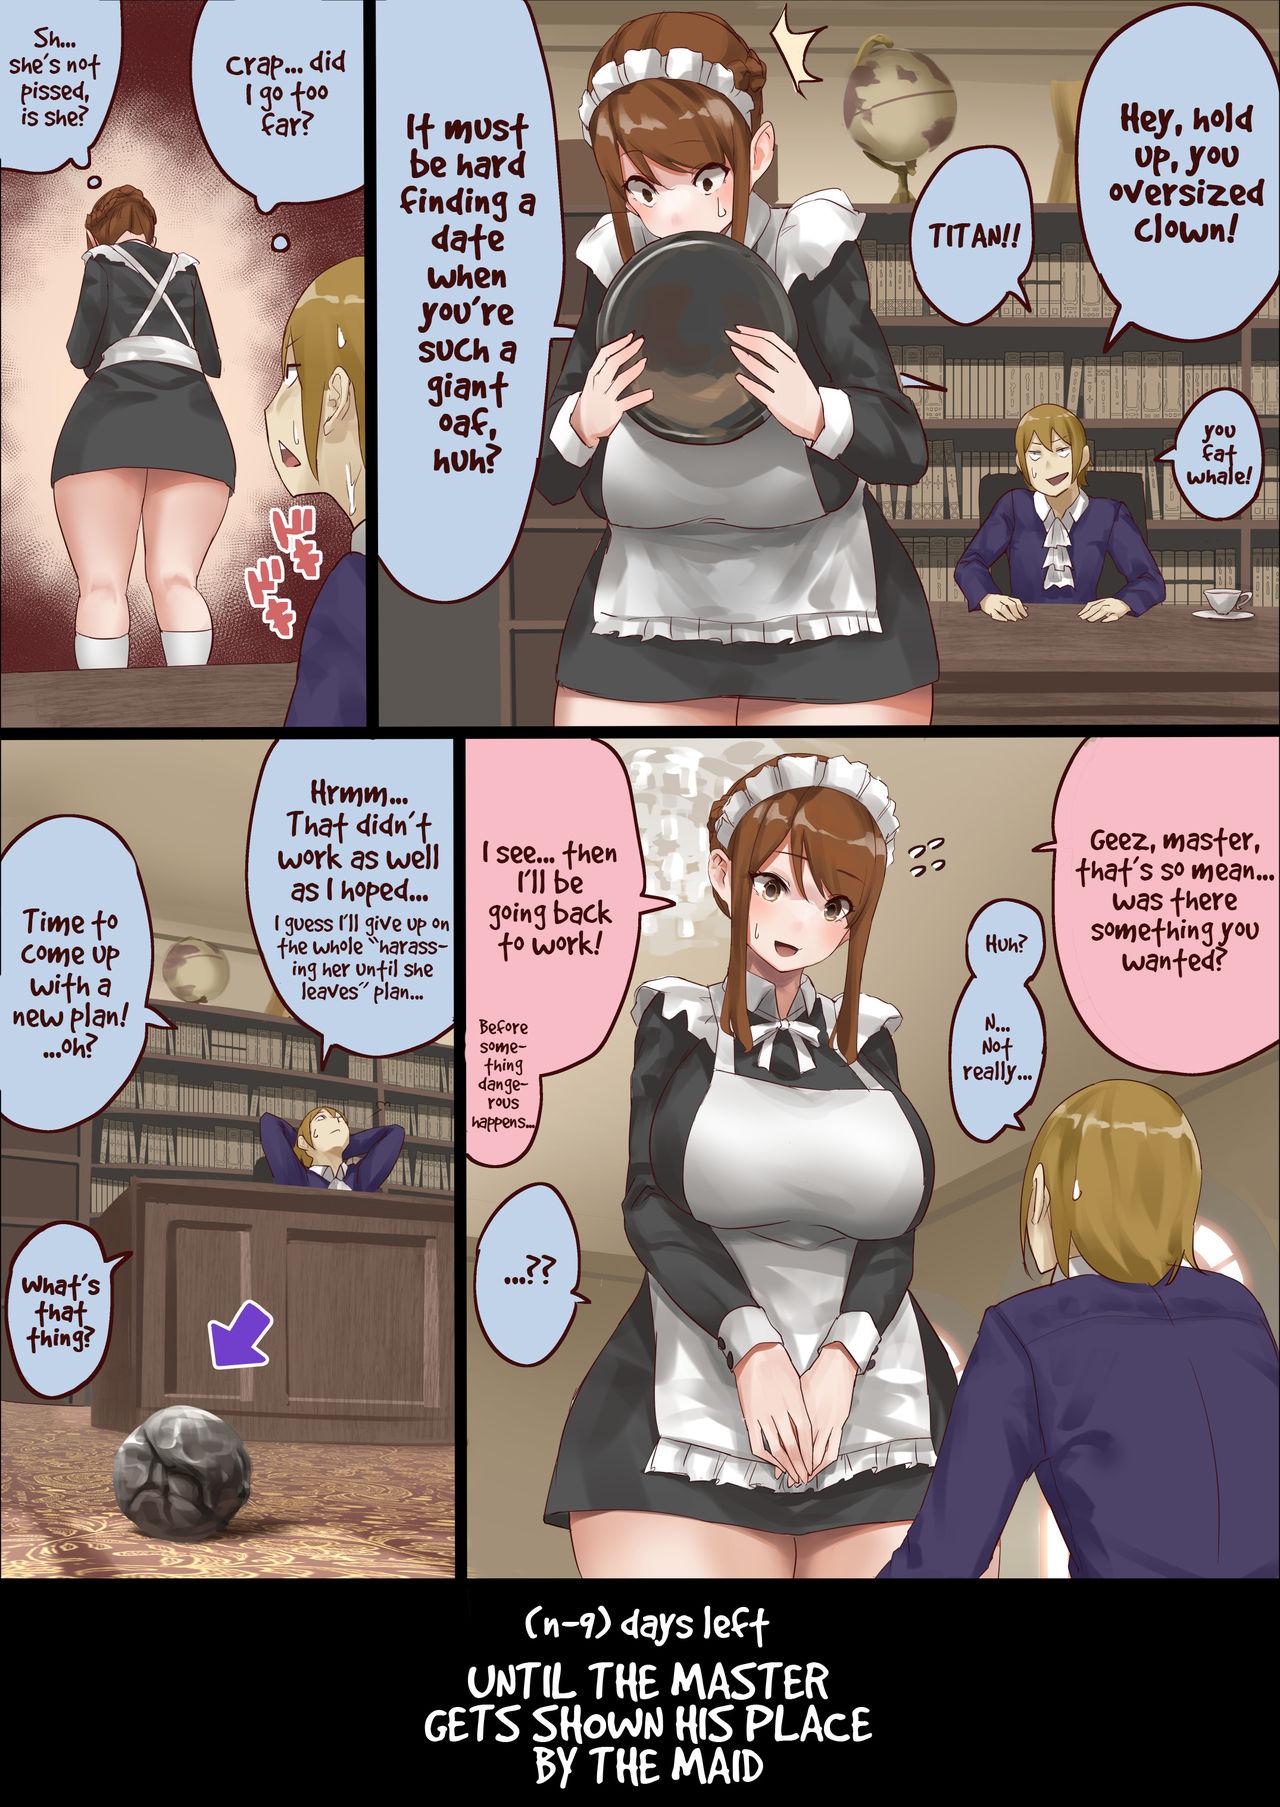 Whores master and maid - Original Black Thugs - Page 10